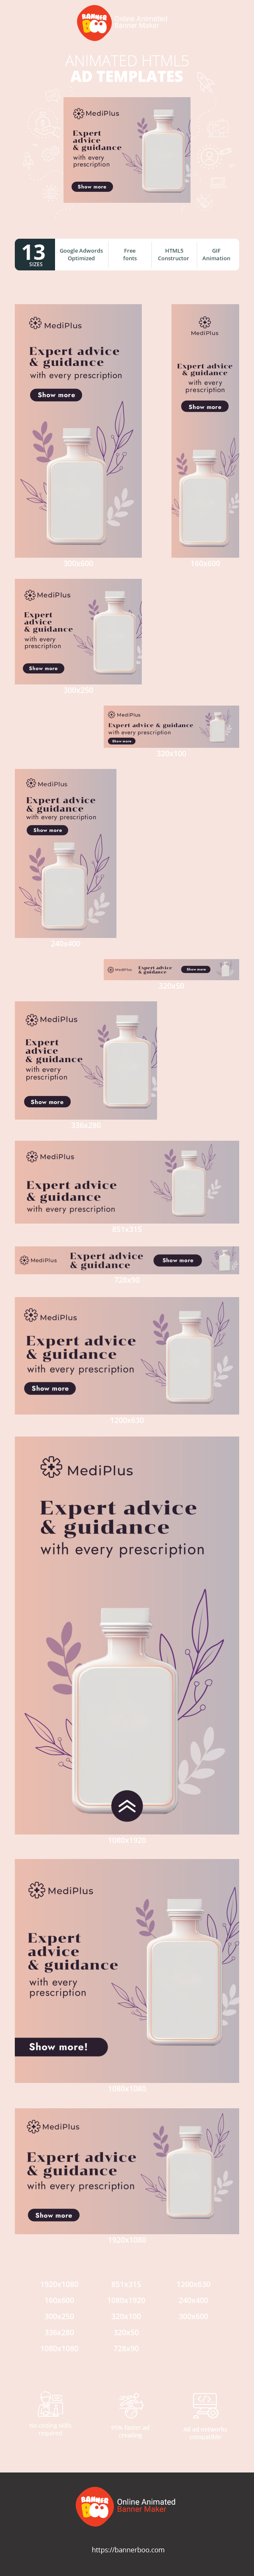 Banner ad template — Expert Advice & Guidance — With Every Prescription